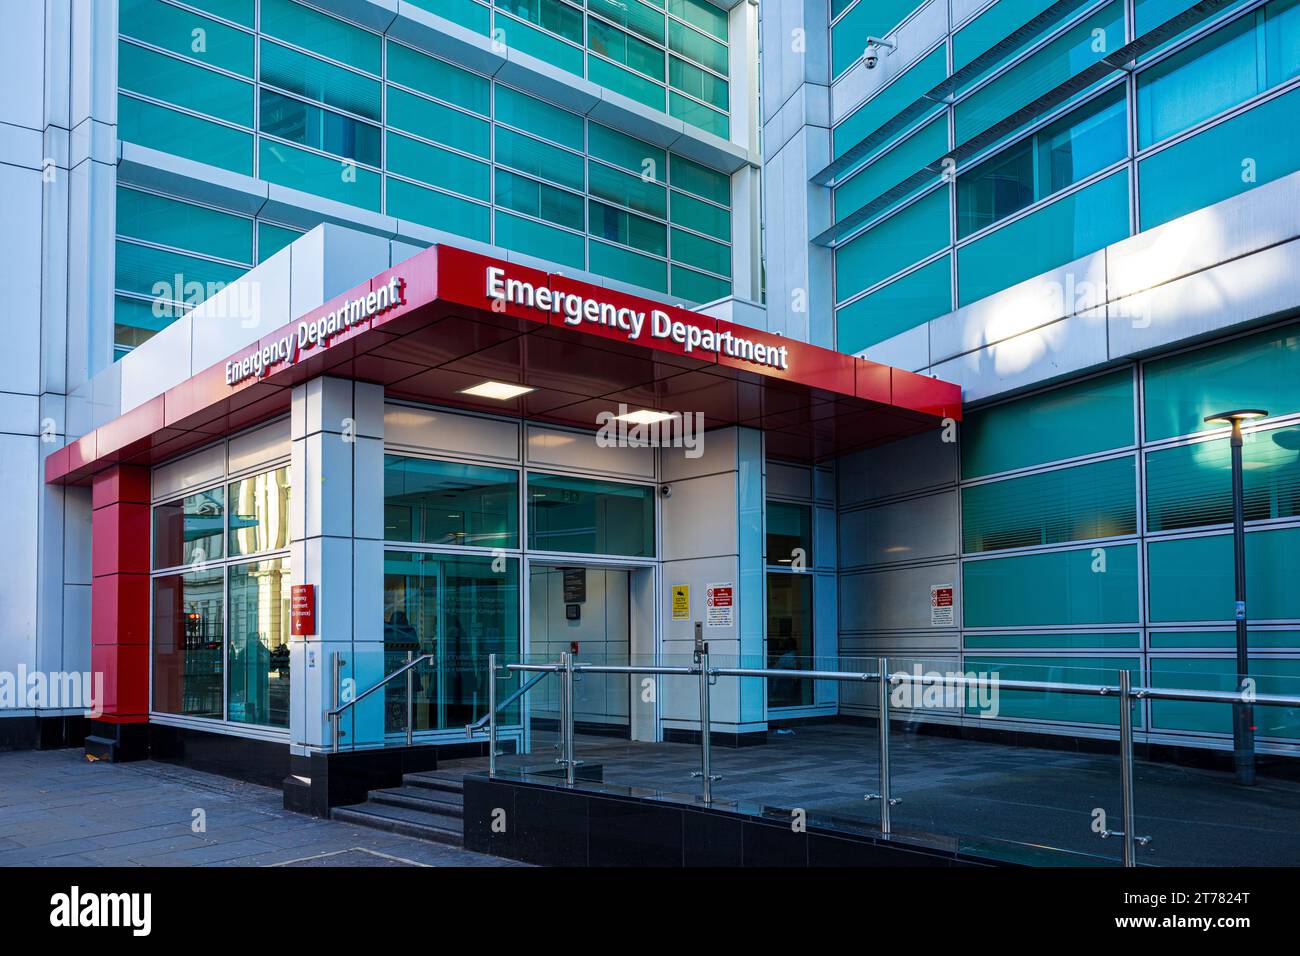 UK Hospital Emergency Department - Hospital A&E Emergency Department - Accident and Emergency Department at a large UK hospital in central London. Stock Photo